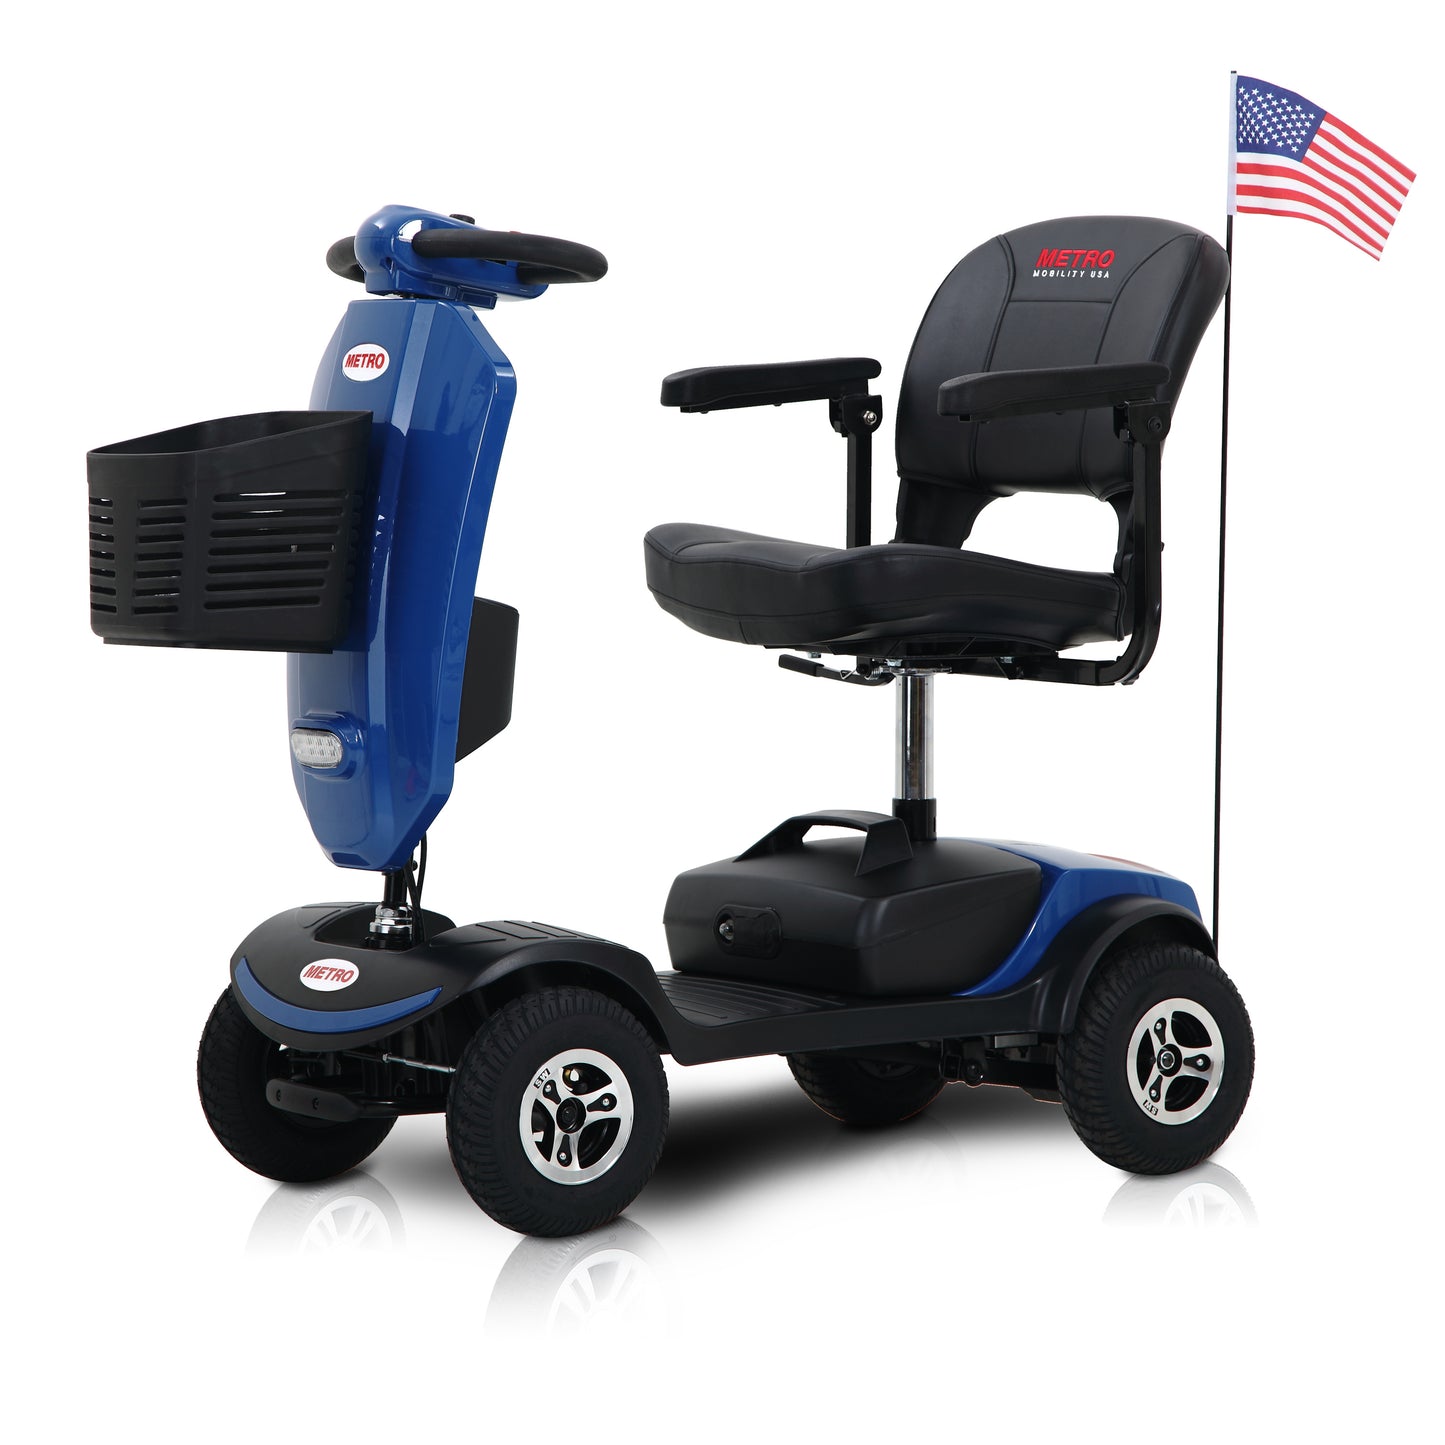 W429S00033 Outdoor compact mobility scooter with windshield